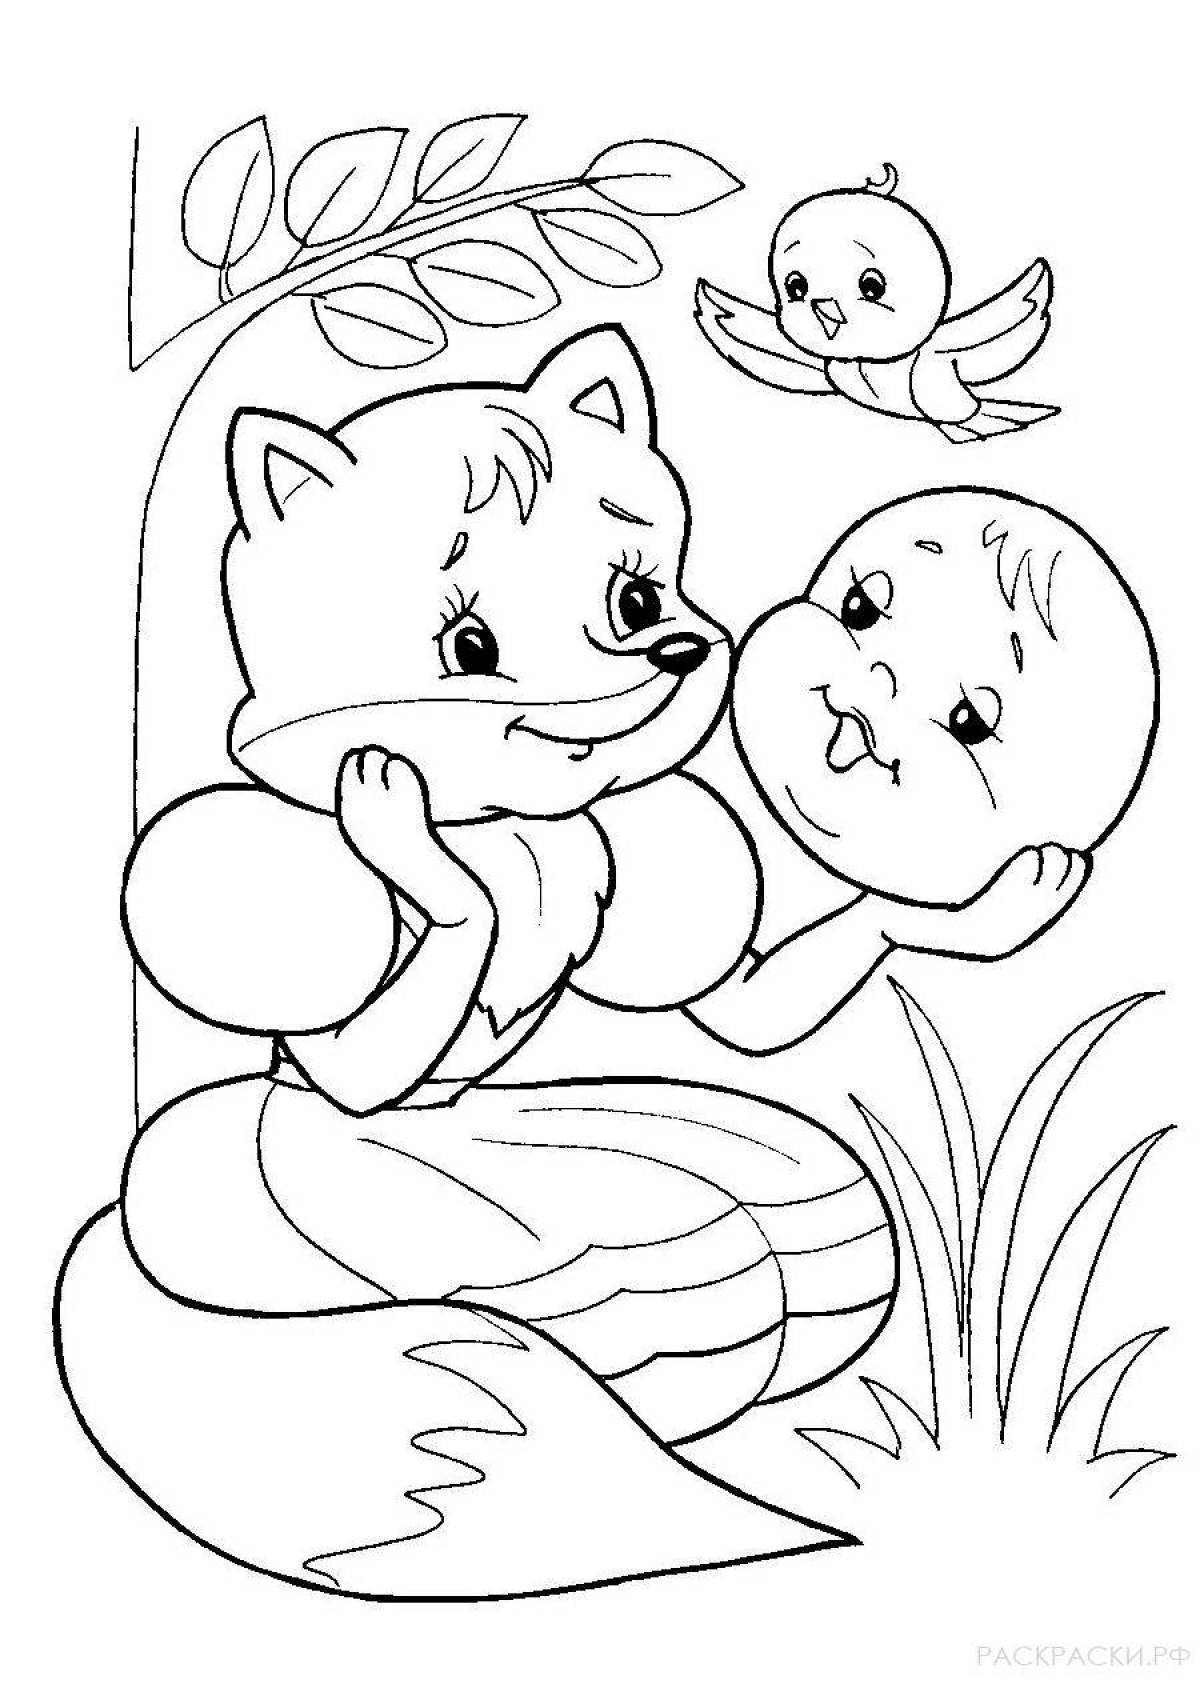 Bright fox and rabbit coloring book